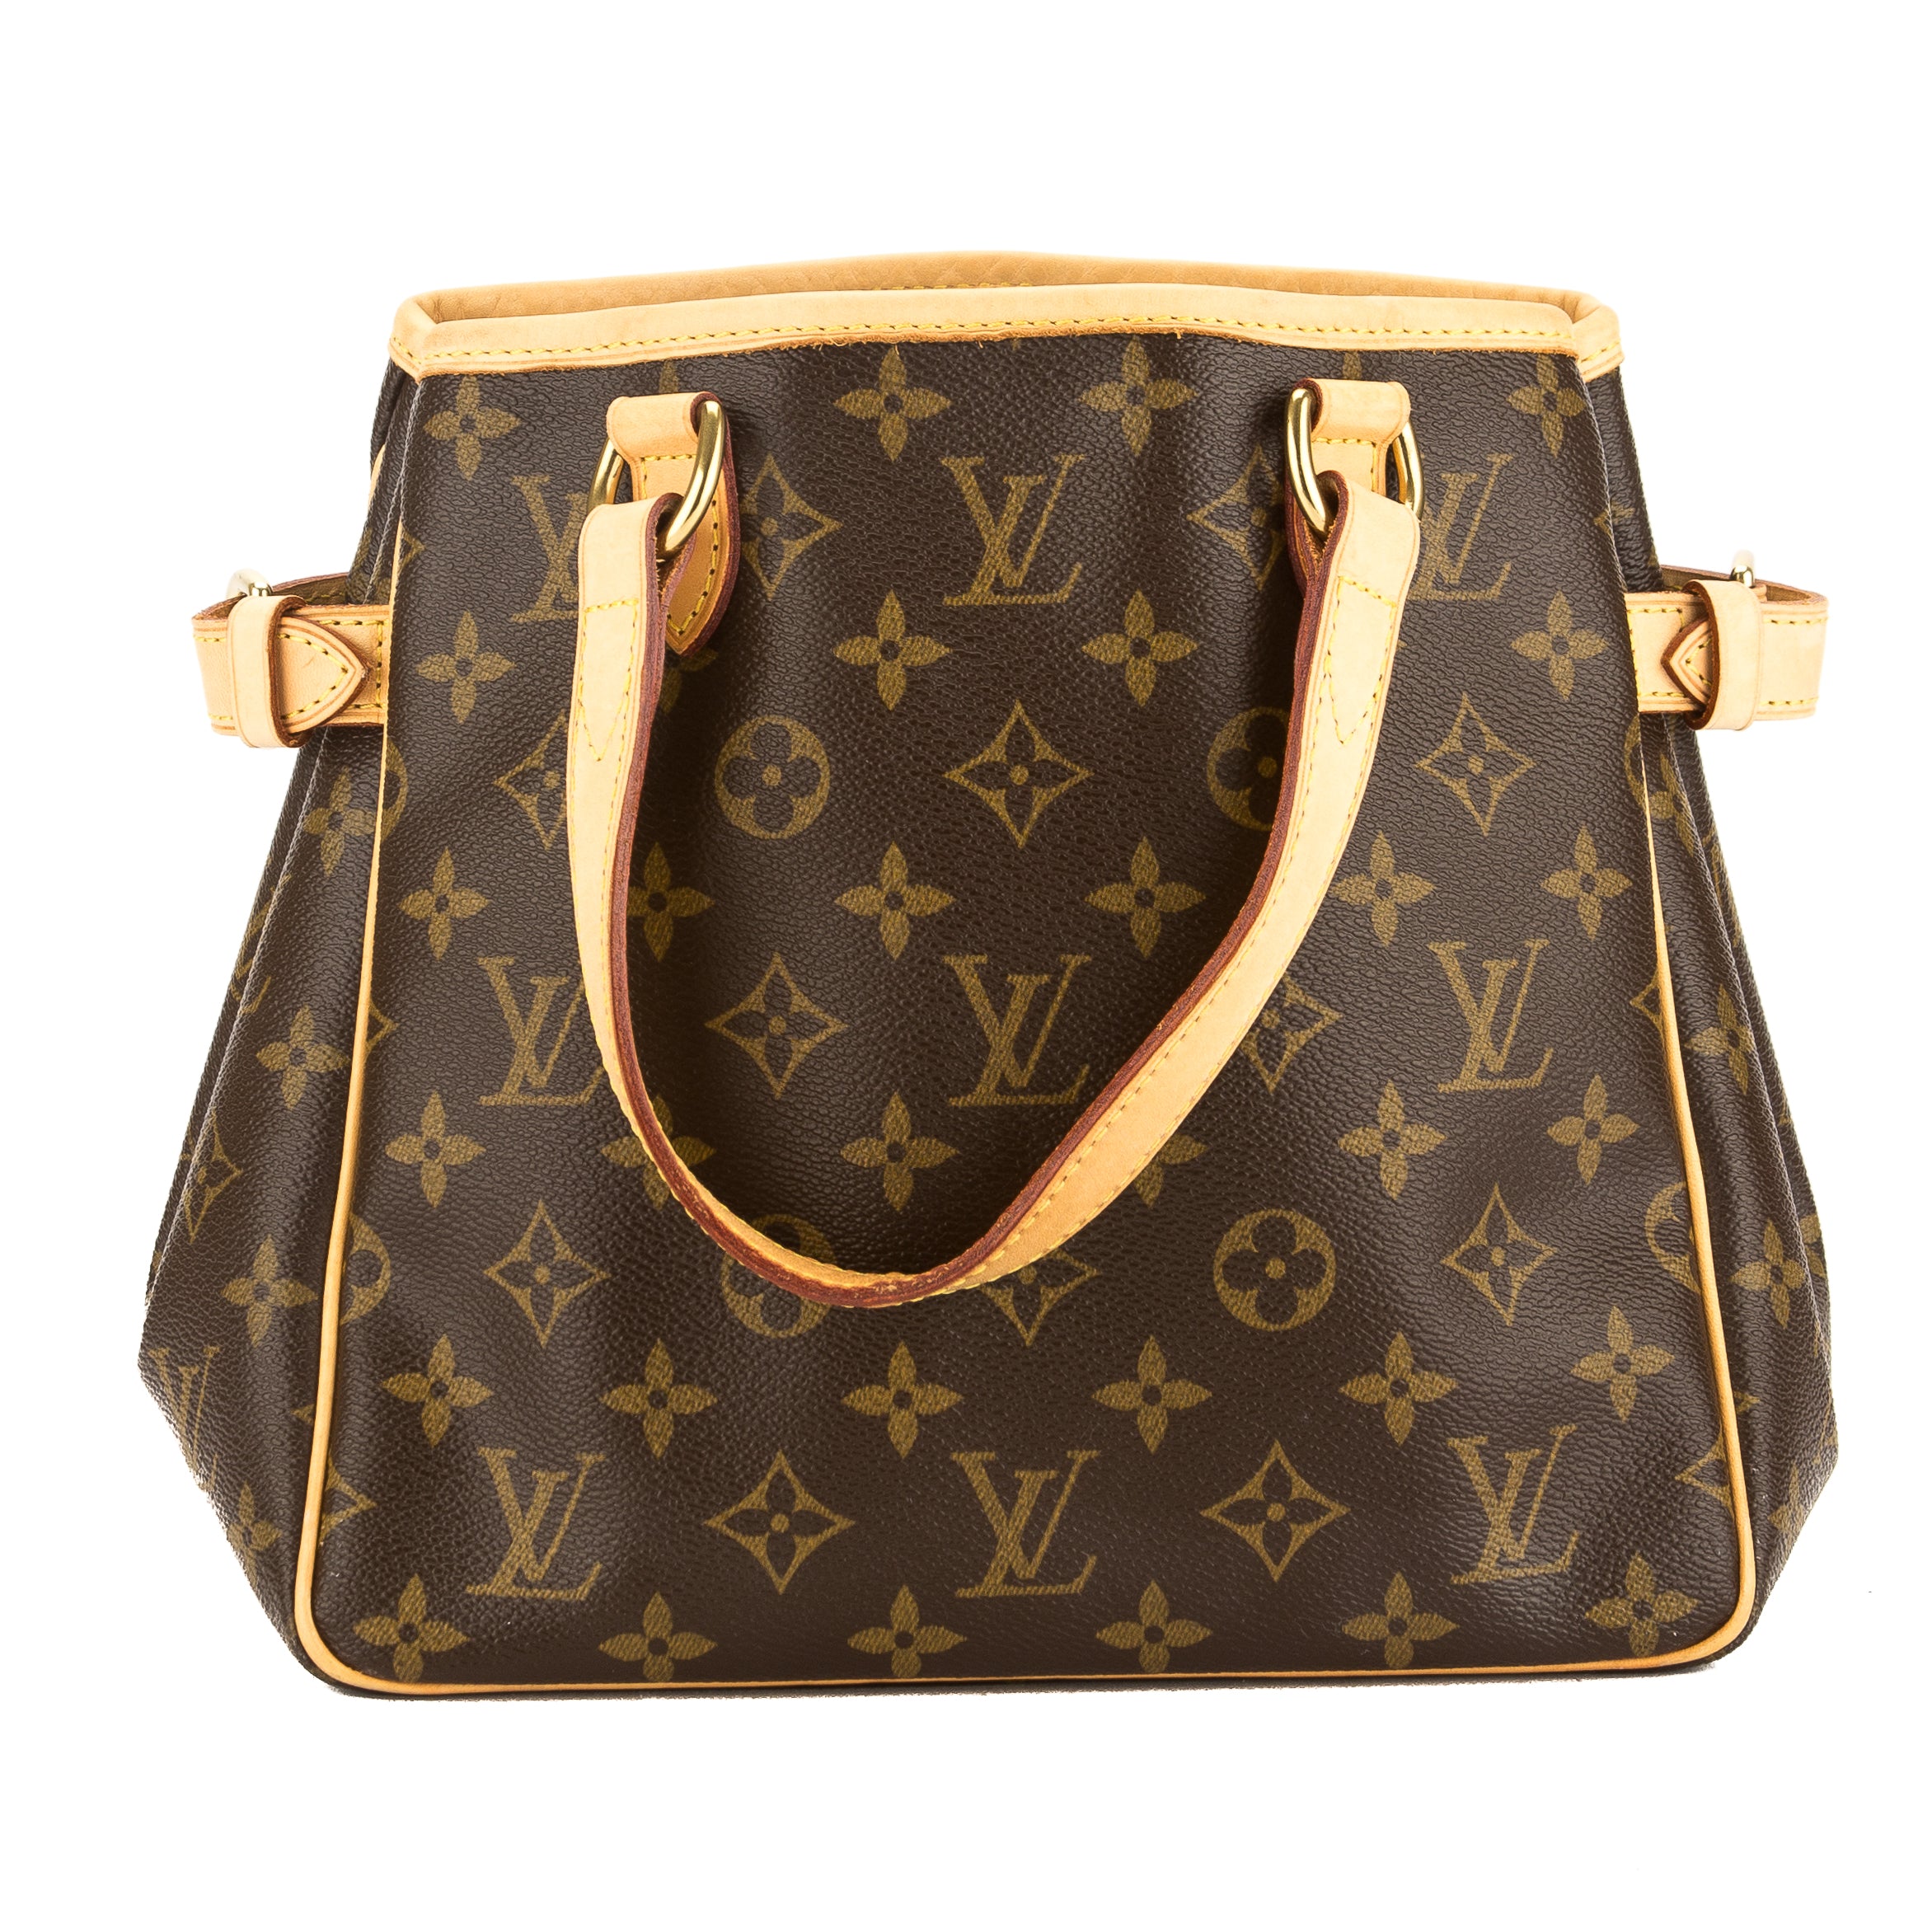 are the louis vuitton bags at dillard's real